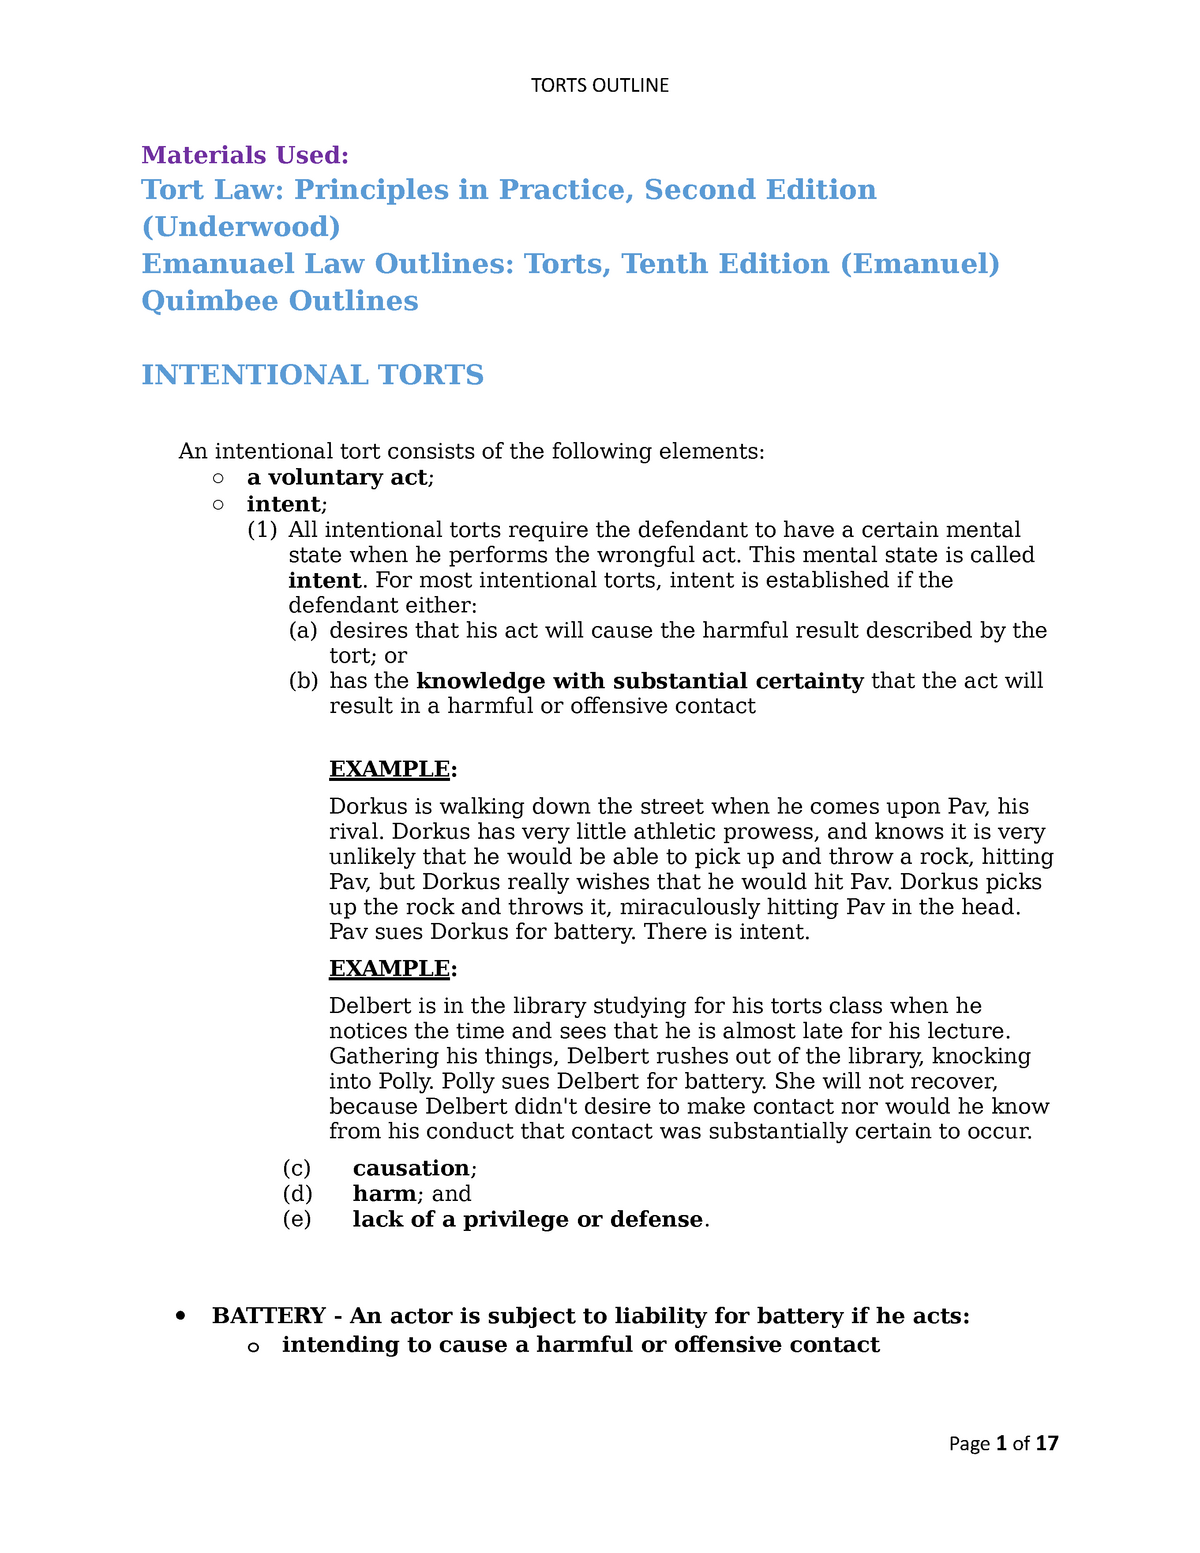 Outline - Torts - Materials Used: Tort Law: Principles in Practice ...